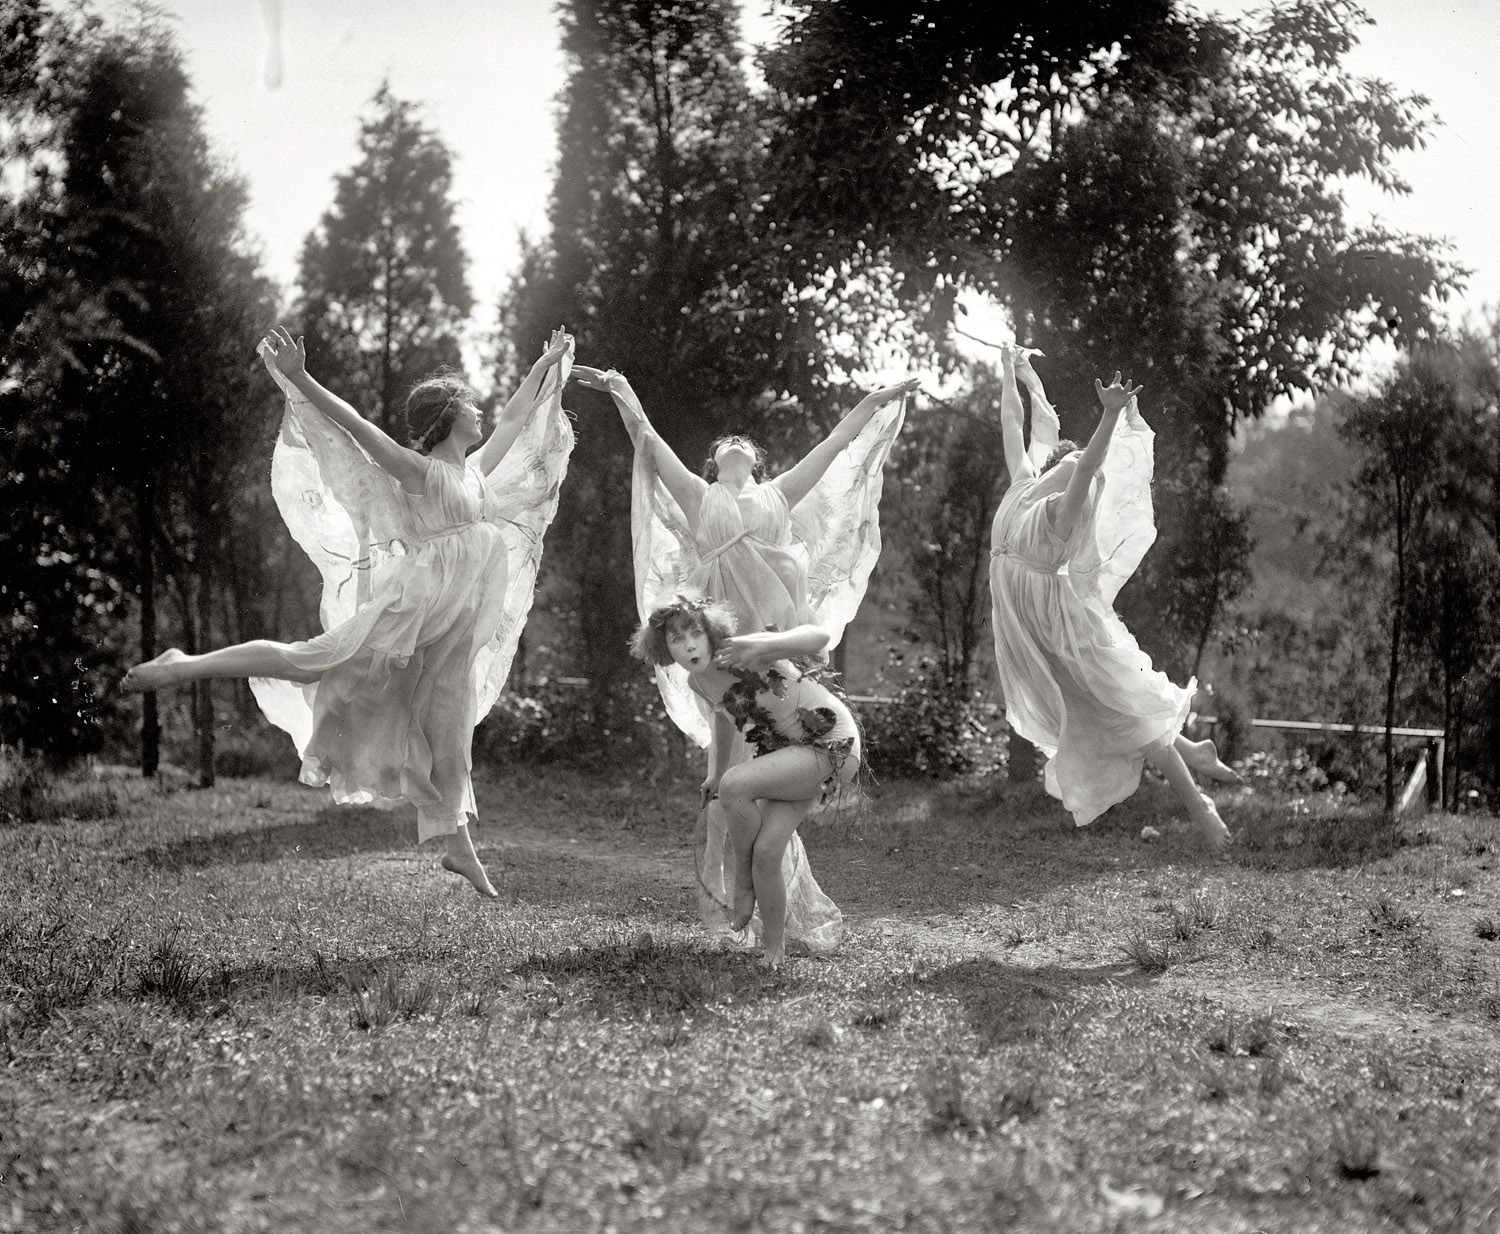 August 20, 1924. "National American Ballet." View full size. National Photo Co.